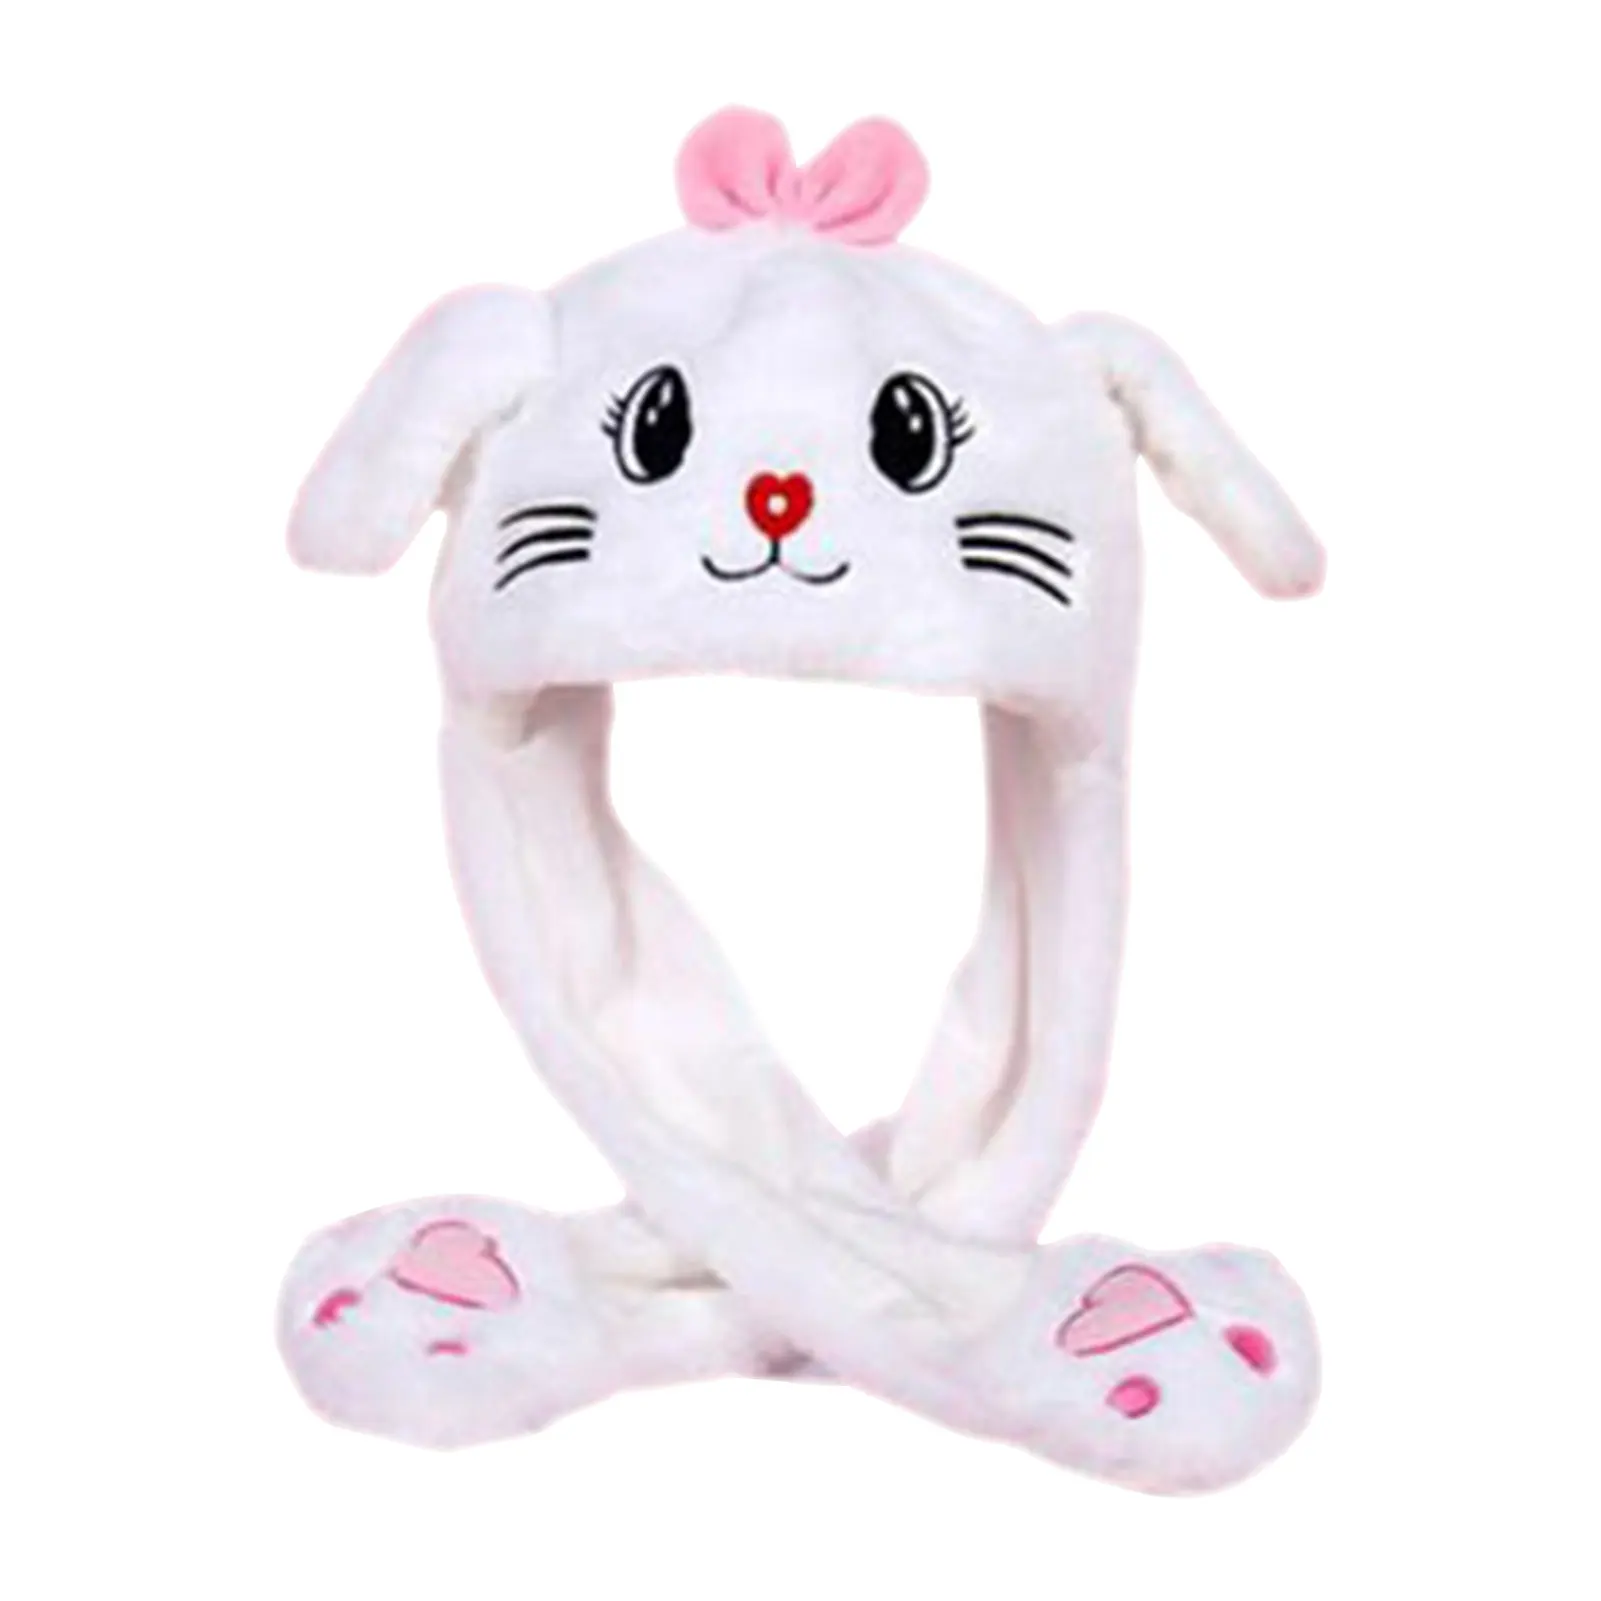 Lovely Moving Bunny Ears Hat Plush Rabbit Hat Funny Play Toy Up Down Moving Bunny Ears Toy Hat Girlfriend Children Girls Gifts rabbit hat with moving ears cartoon toy hat airbag funny toy cap kids plush toy hat plush embroidery rabbit ear hat gift